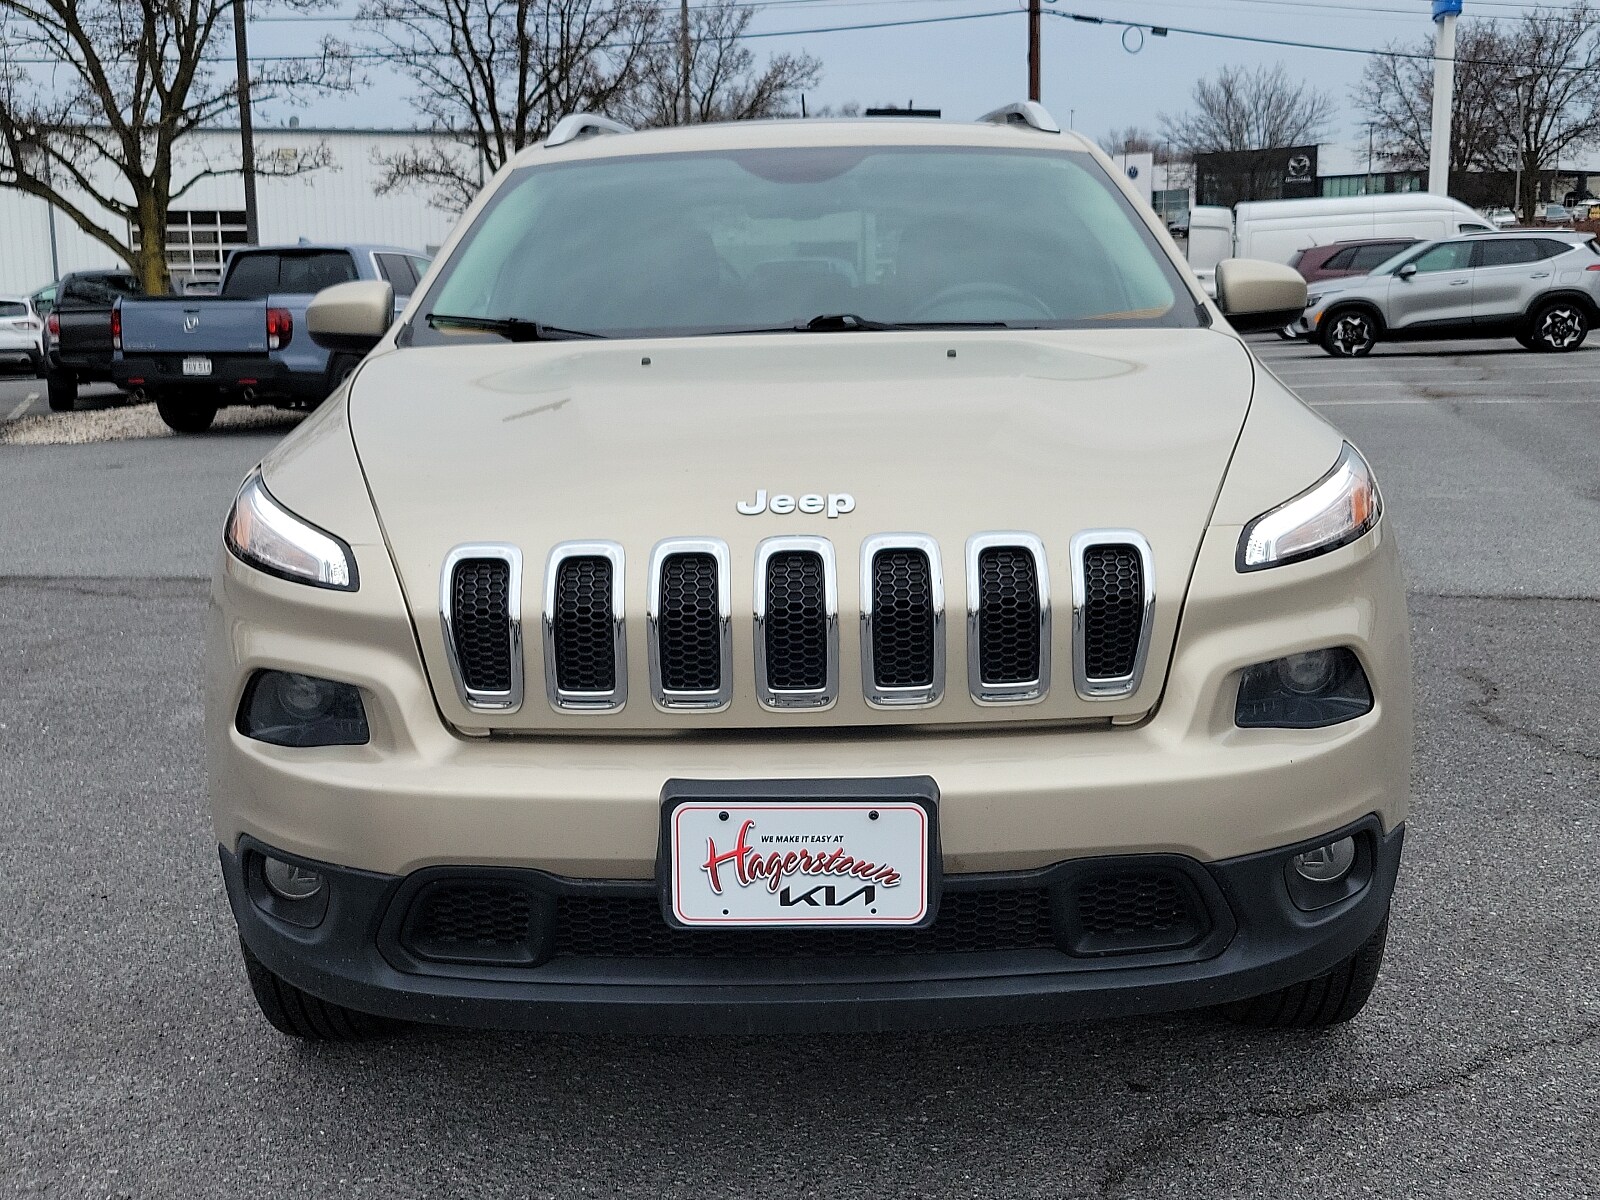 Used 2015 Jeep Cherokee Latitude with VIN 1C4PJMCS0FW682271 for sale in Hagerstown, MD